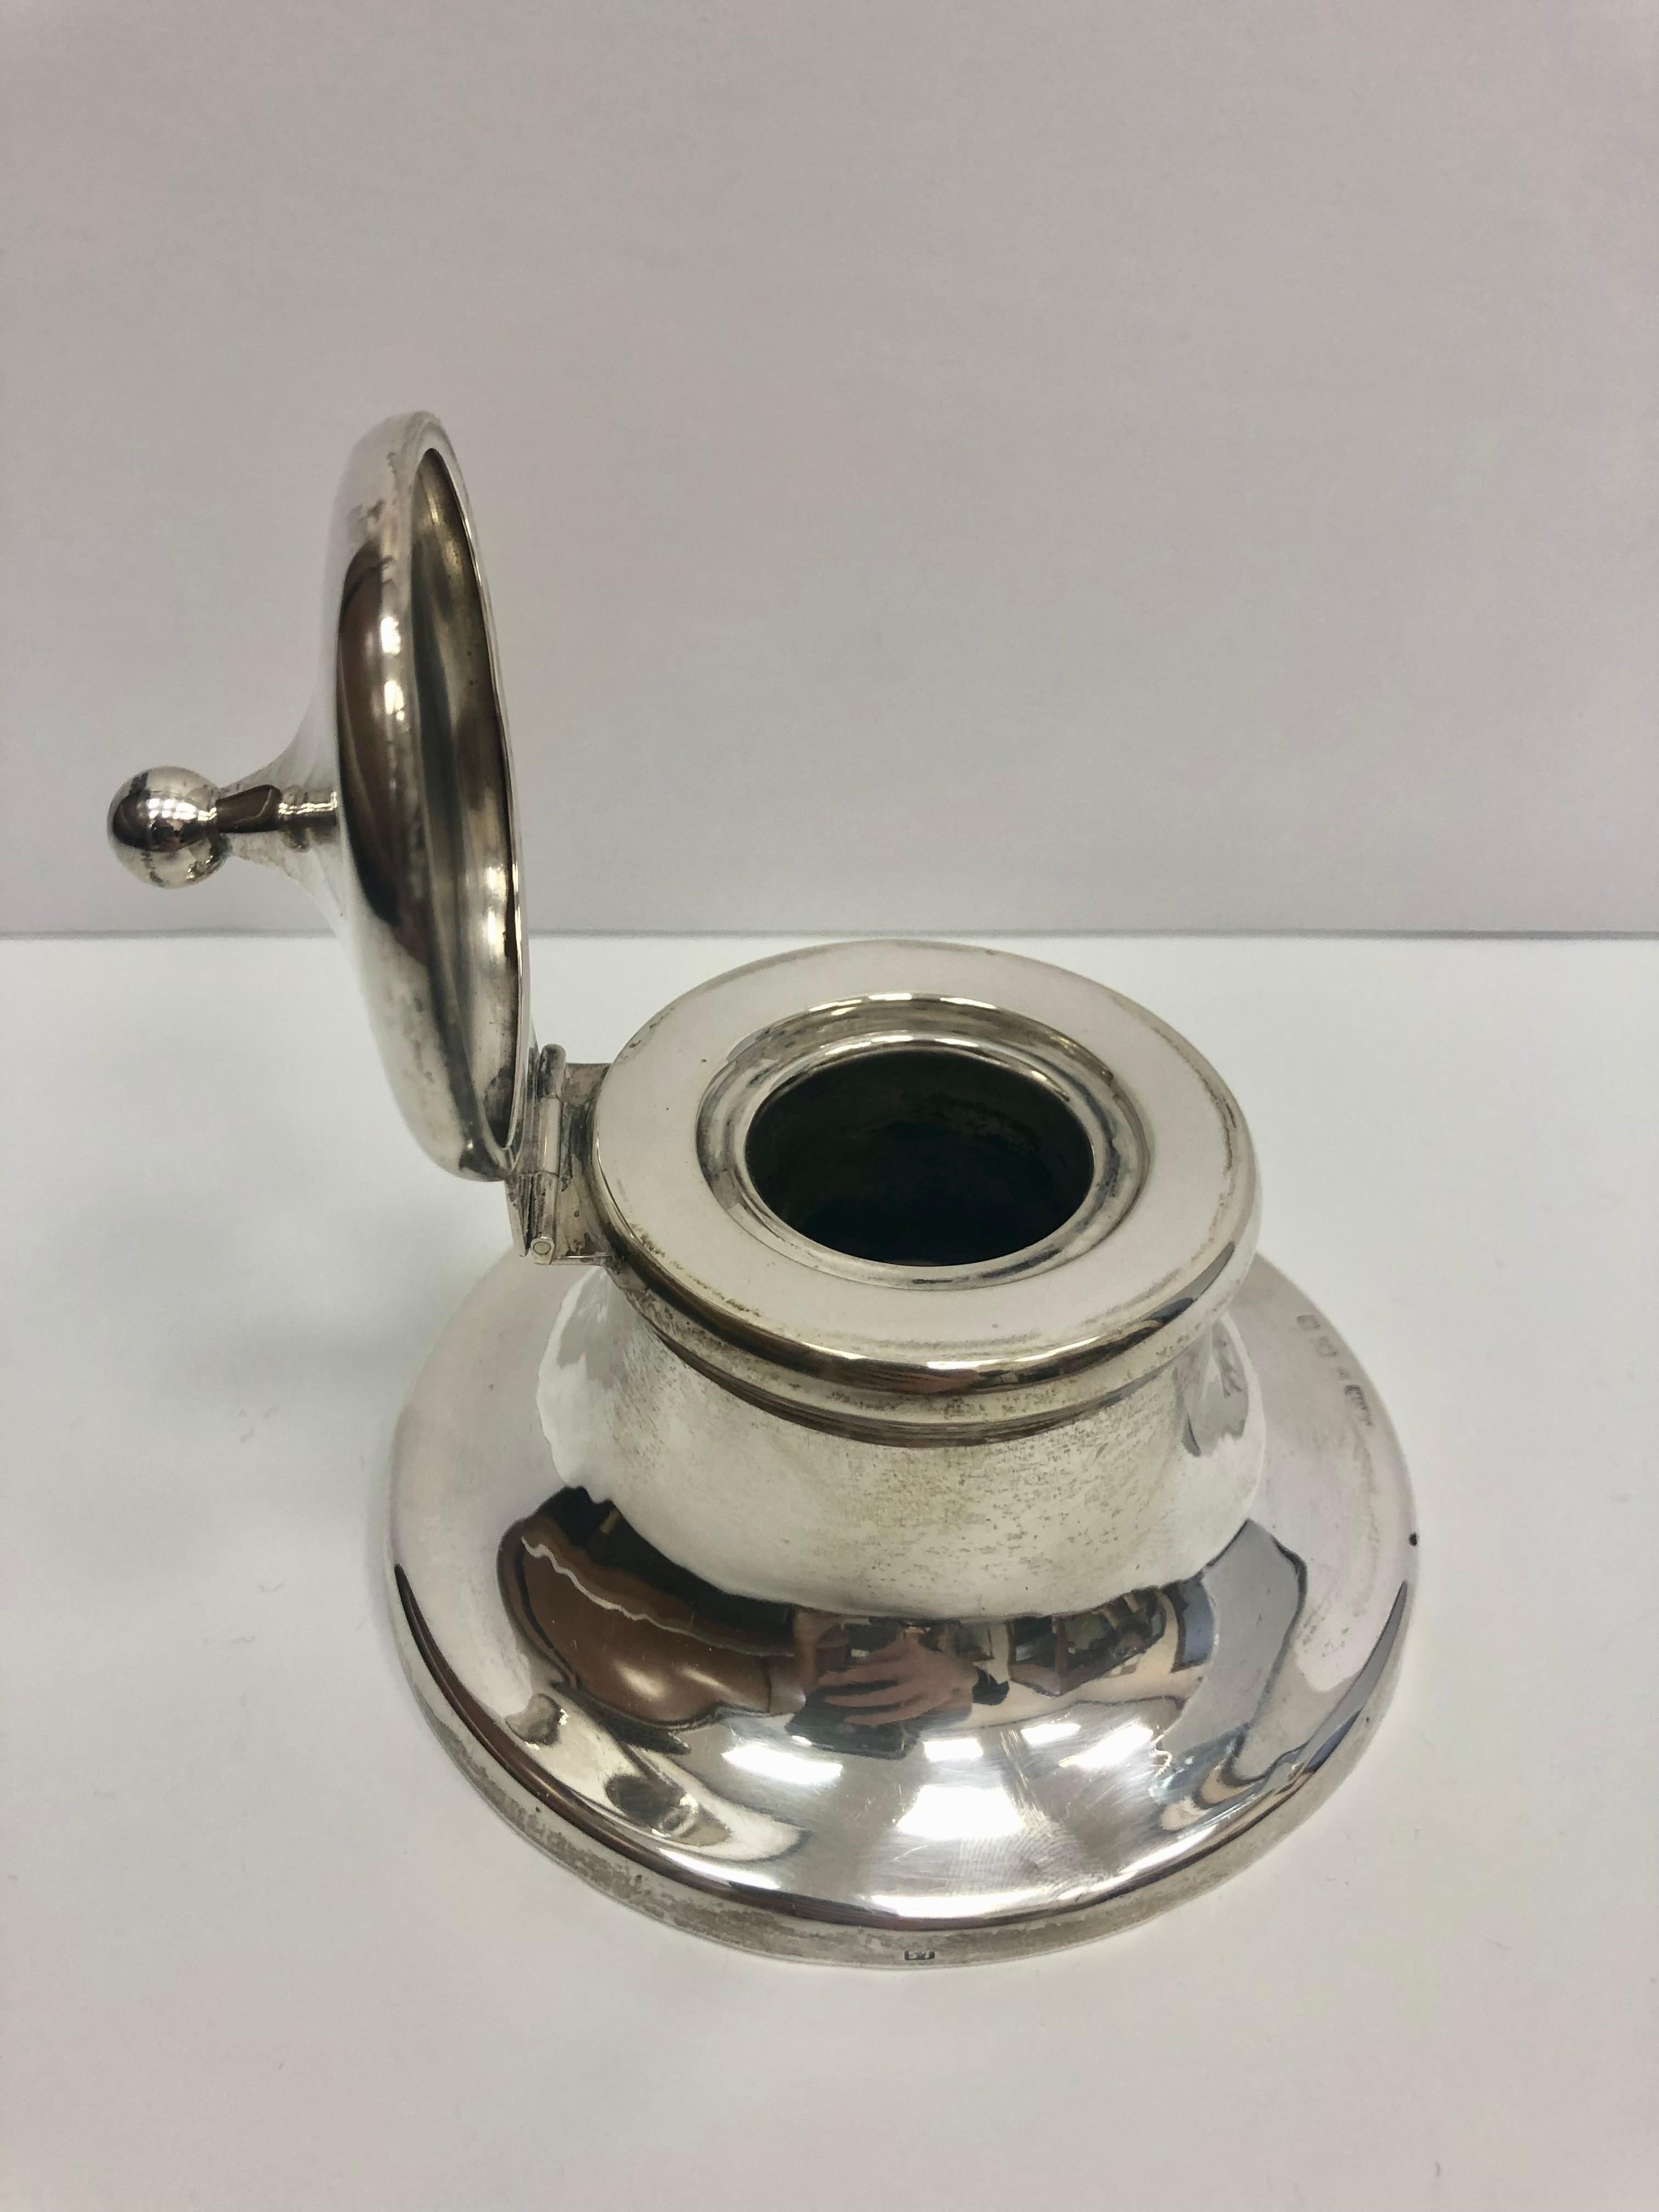 Handsome sterling silver antique inkwell has a lovely, simple design and was made by William Harrison Walter, circa 1905. It has a high polished profile, with a hinged lid and is weighted with a wooden bottom. The piece also has a beautiful hand